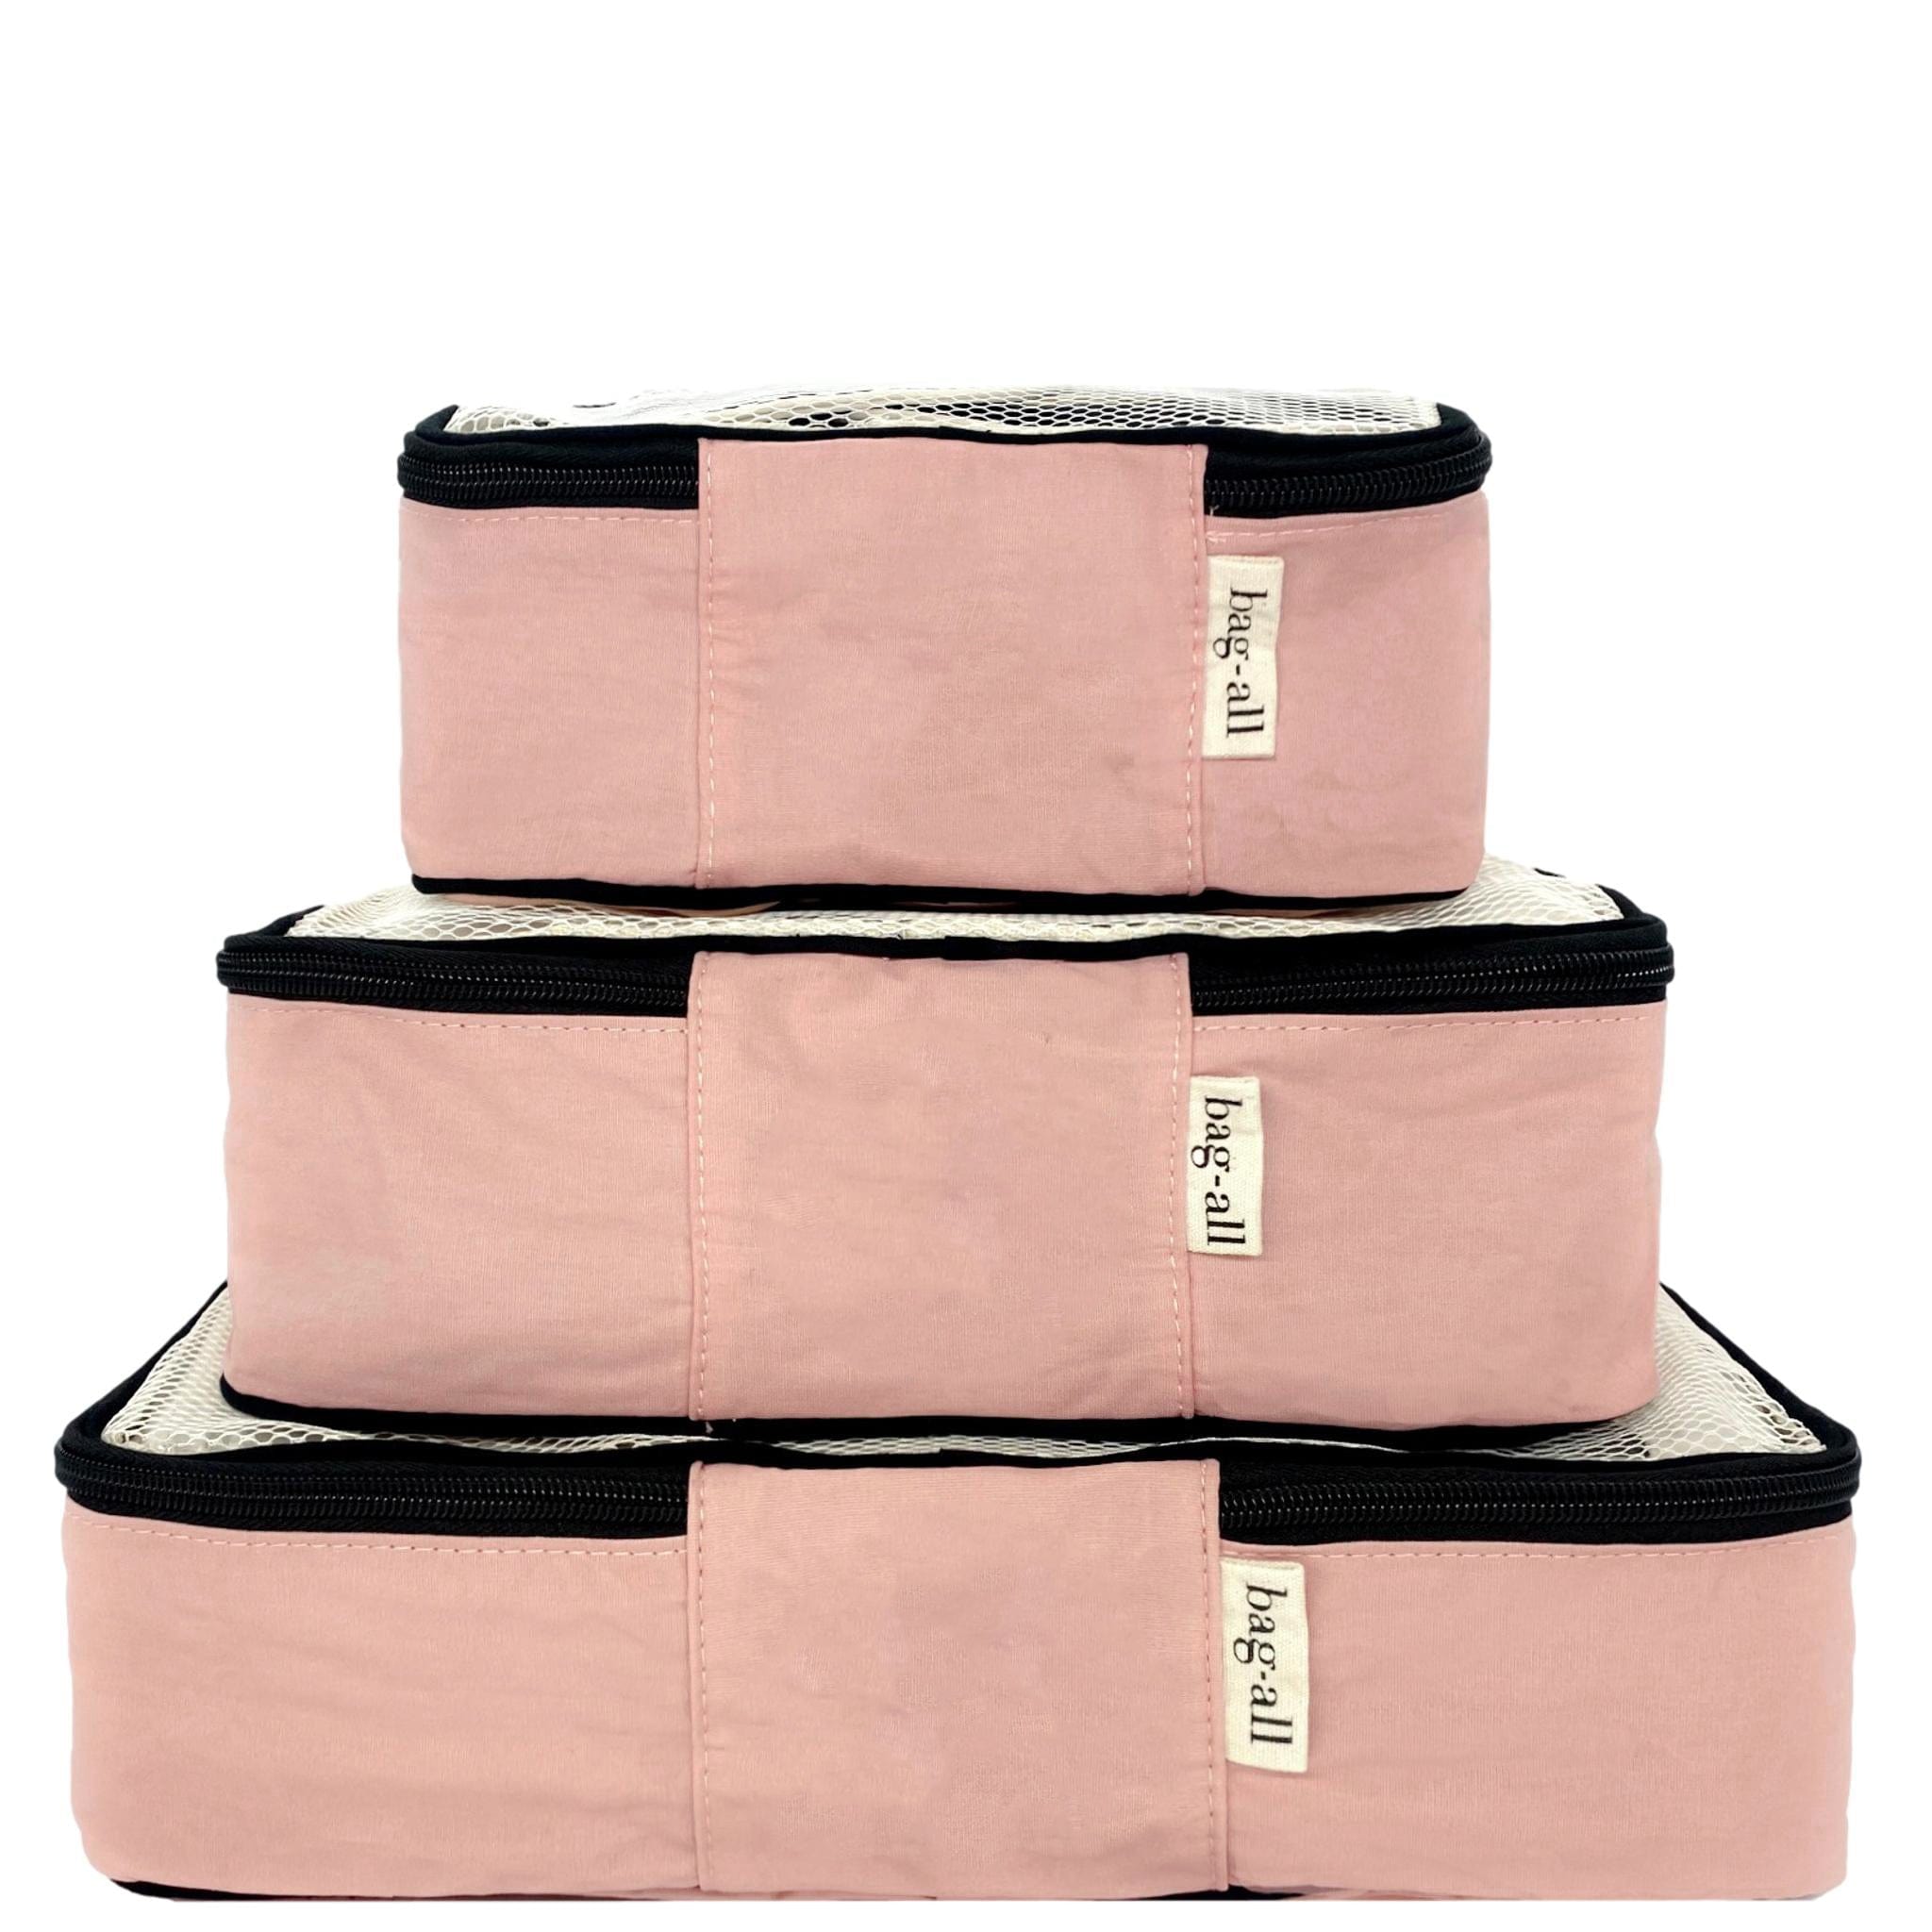 Monogrammable Cotton Packing Cubes 3-pack Pink/Blush - Bag-all